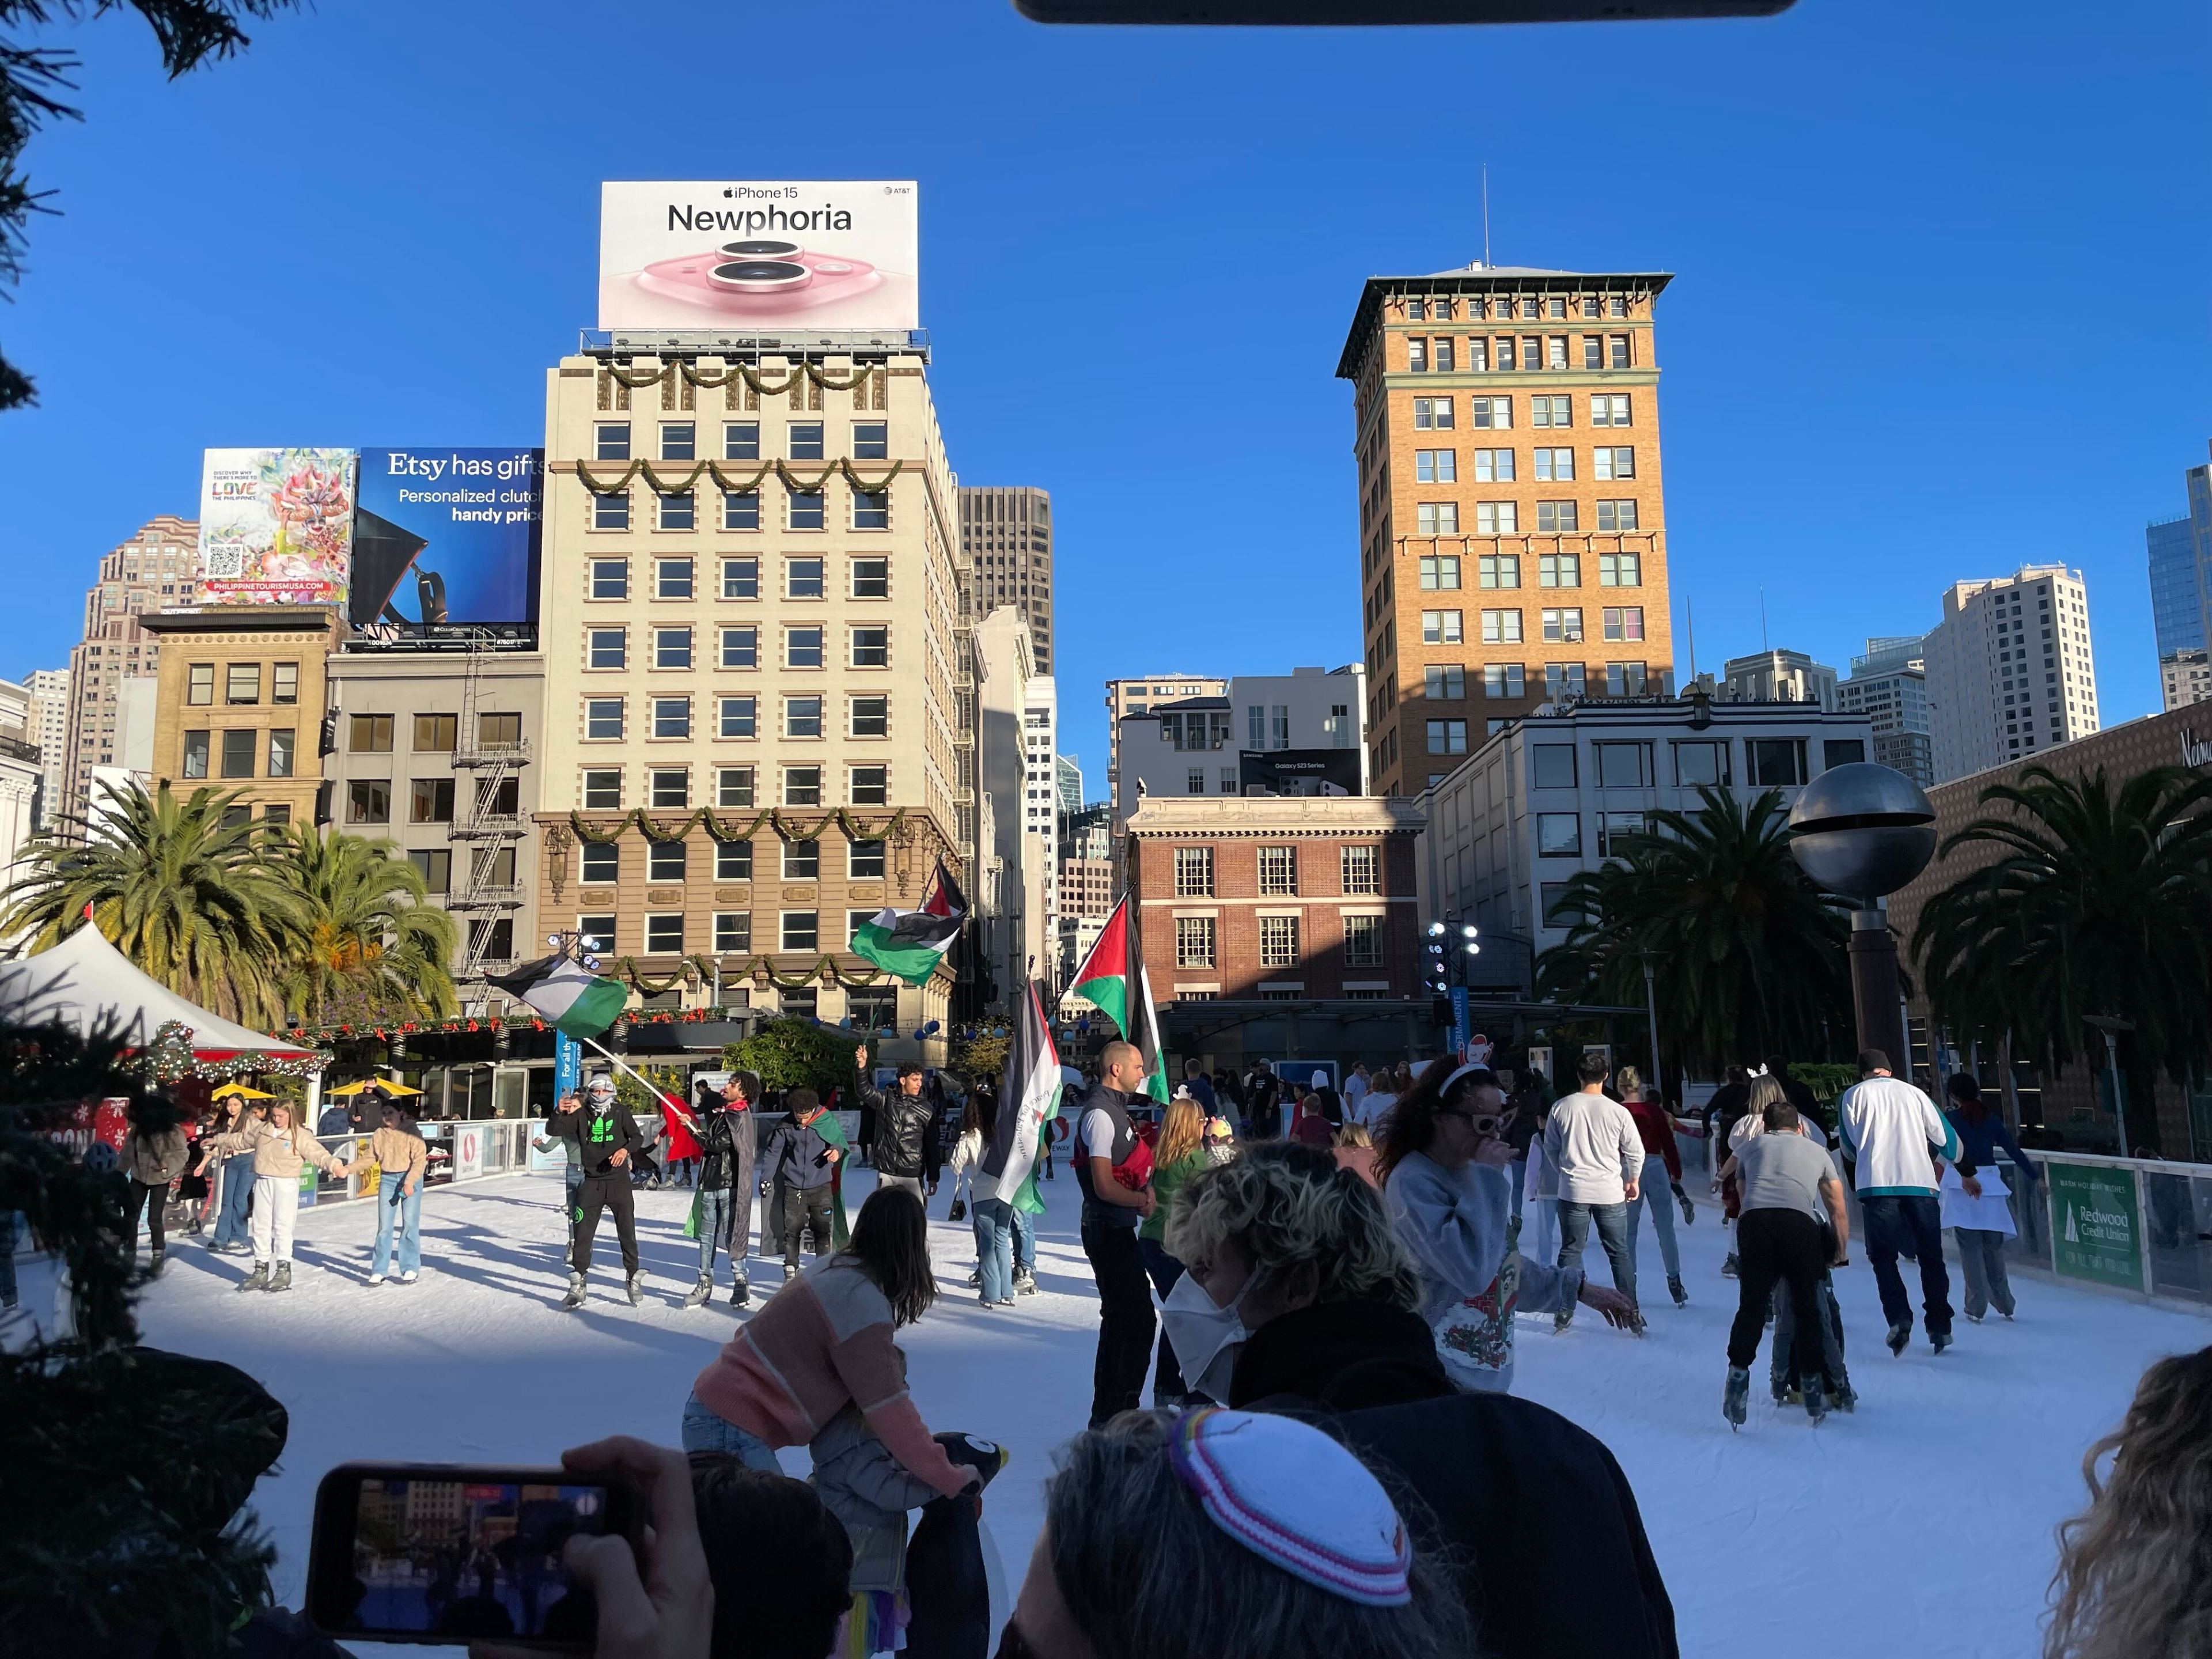 An outdoor ice rink bustling with skaters, surrounded by palm trees, with tall buildings and ads overhead.